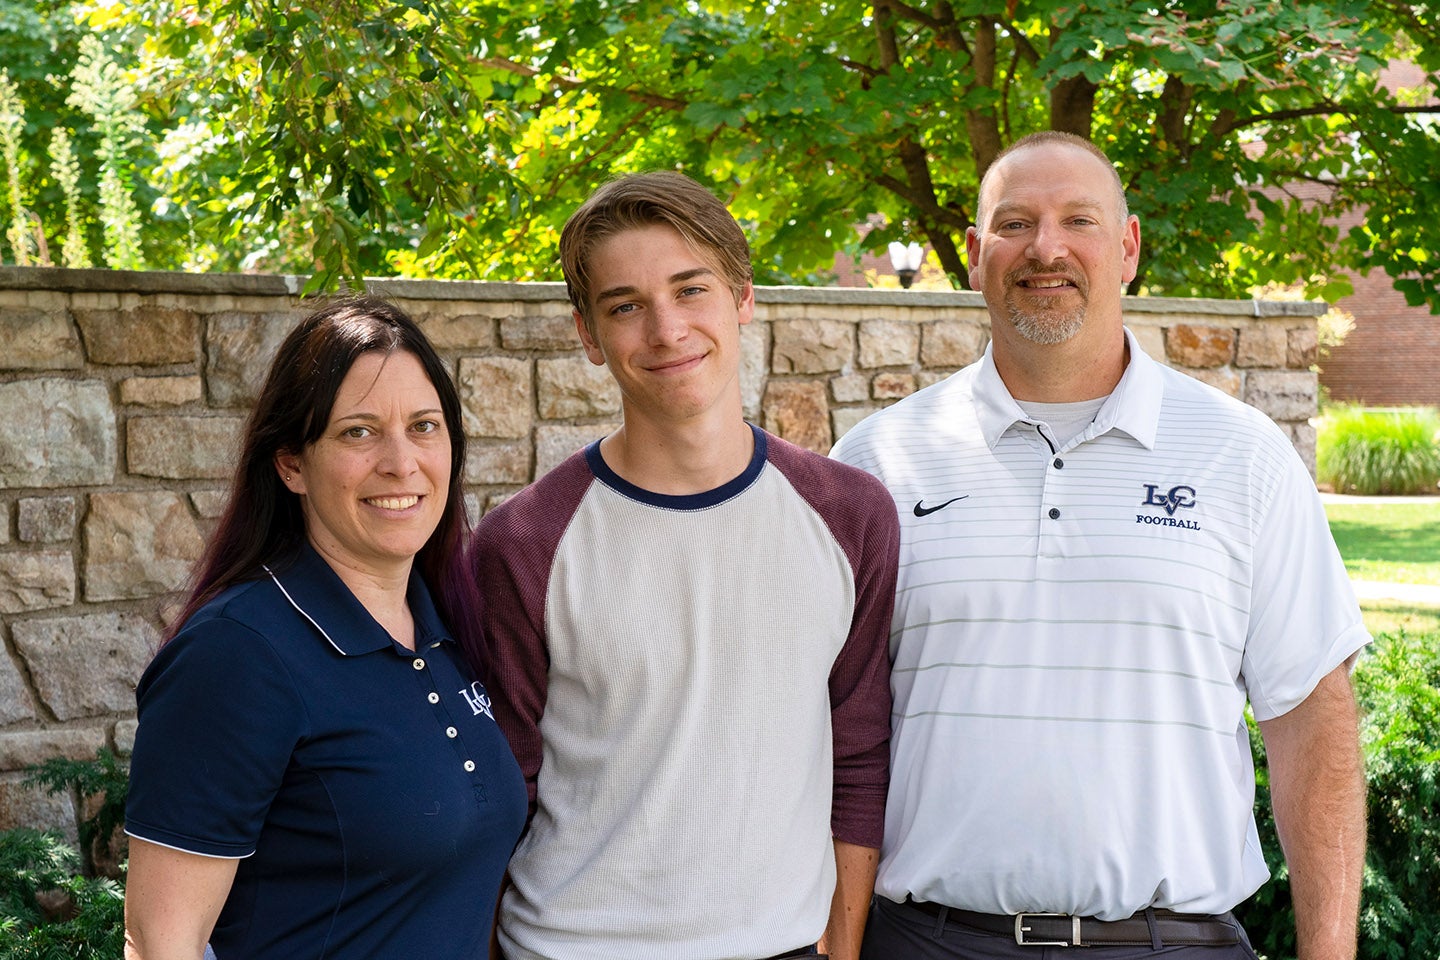 Student smiling with his parents in shirts with the LVC logo.